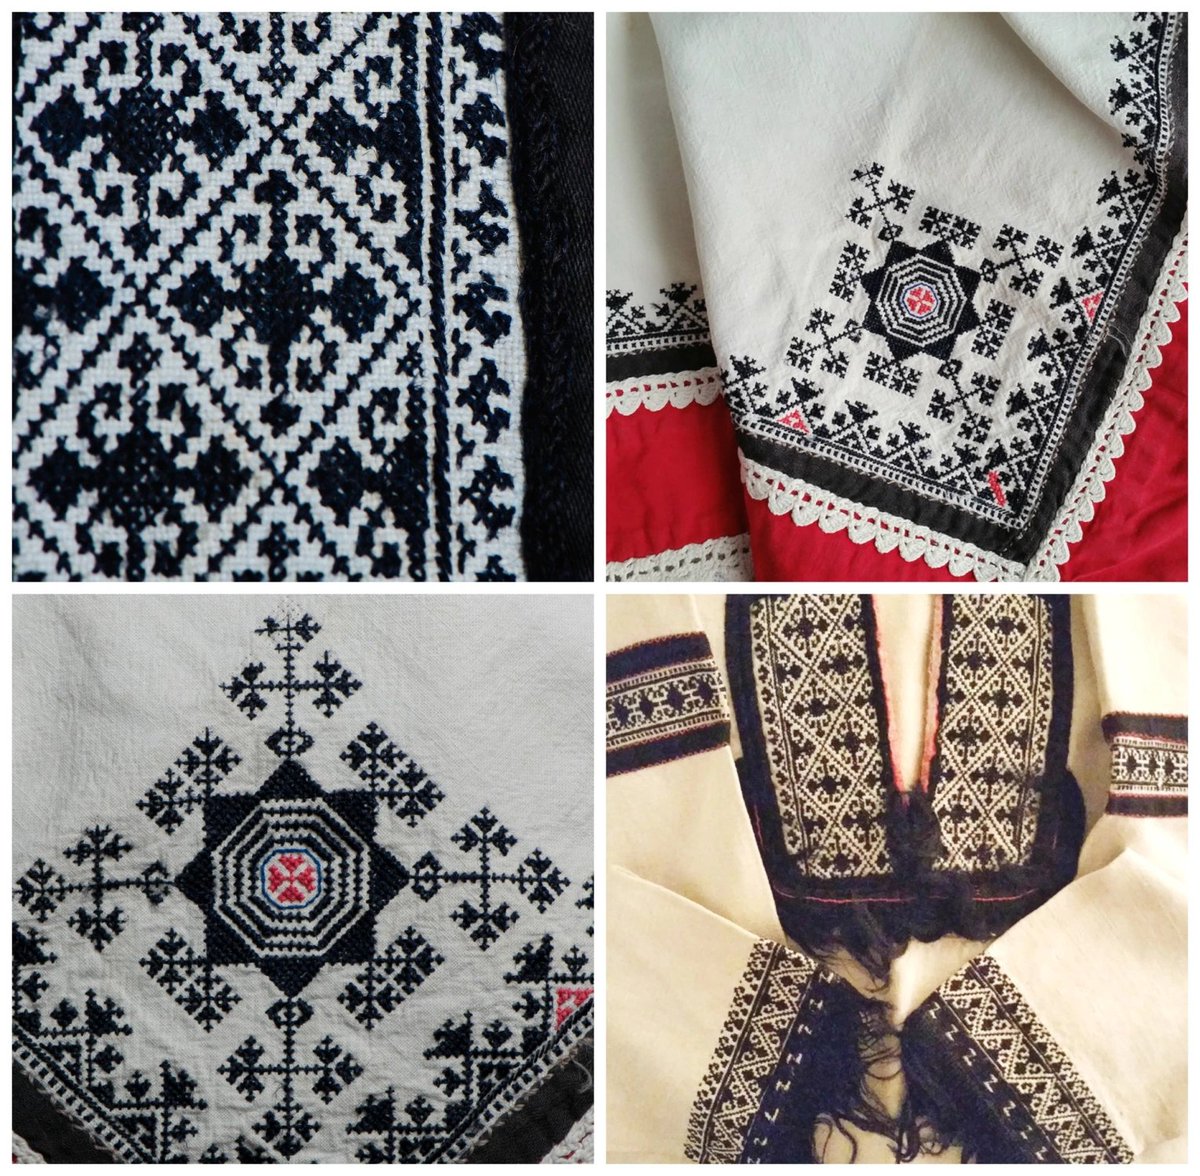 The most common ornamental elements in Zmijanjski Vez were rhombuses and polygons known traditionally as jabuke (apples). Arranging them in a cross-like pattern created the krst od jabuka (cross of apples), a usual ornament on kerchiefs.